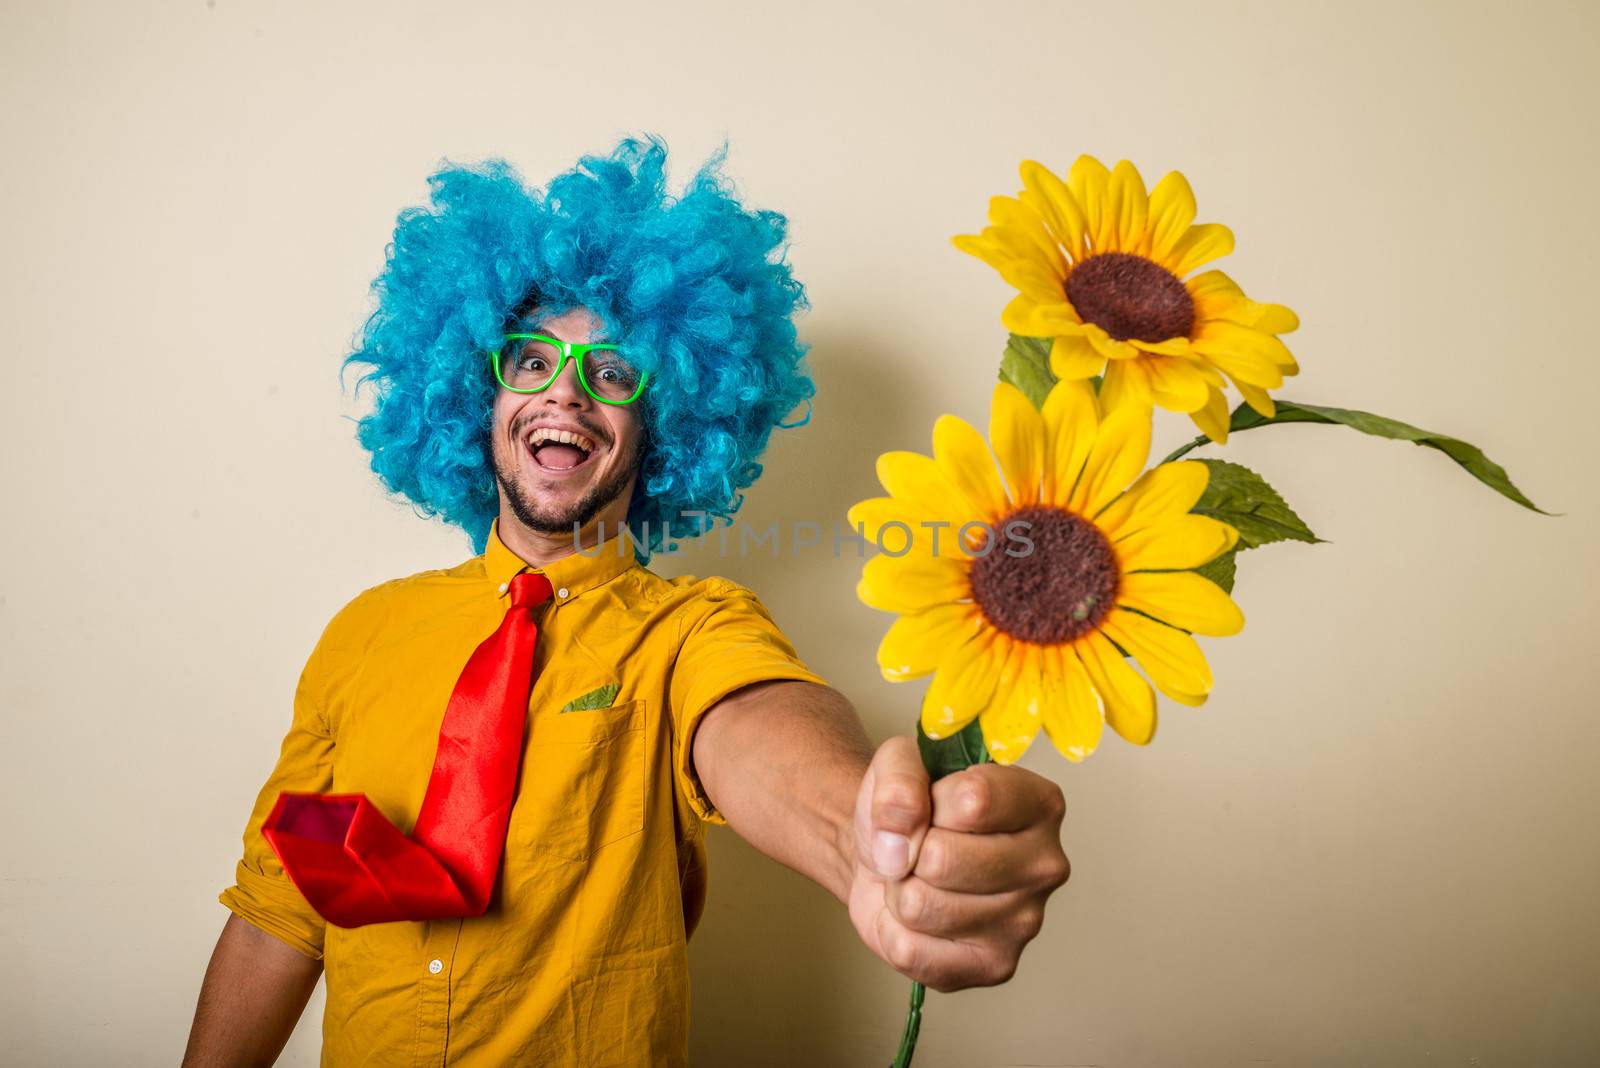 crazy funny young man with blue wig on white background